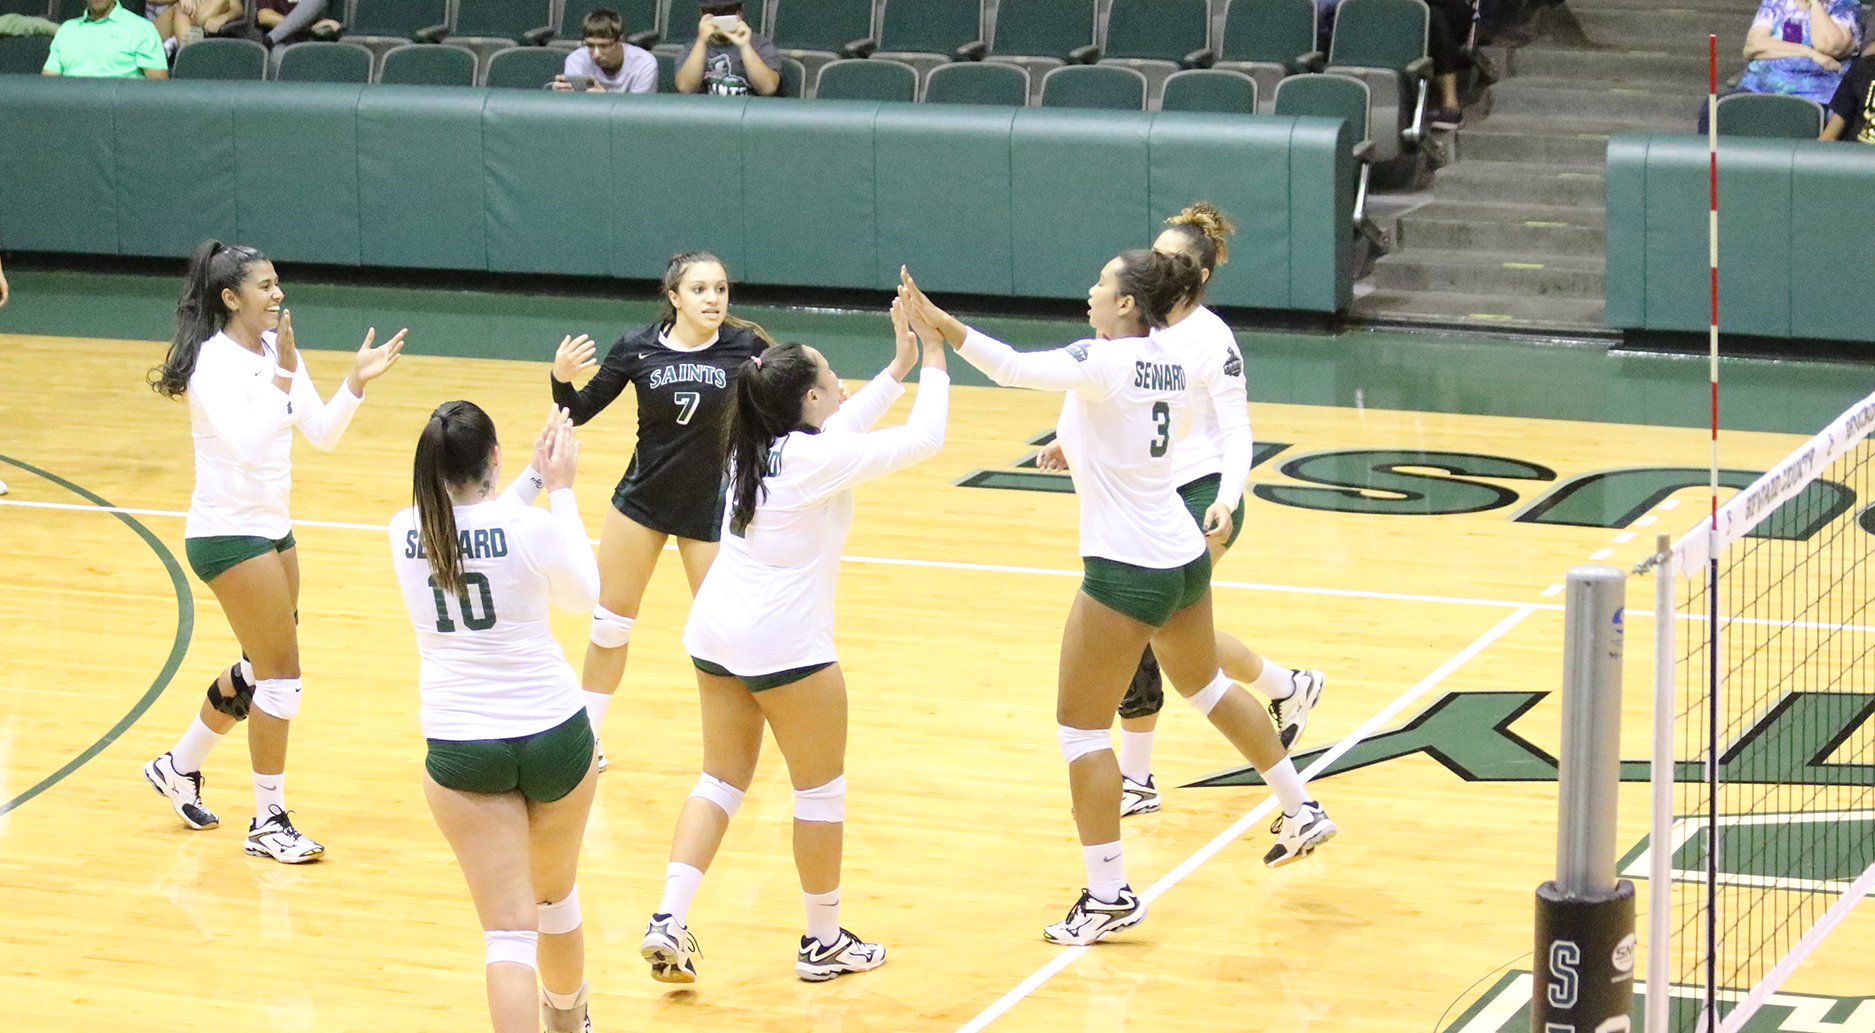 Lady Saints Recognized with AVCA Team Academic Award